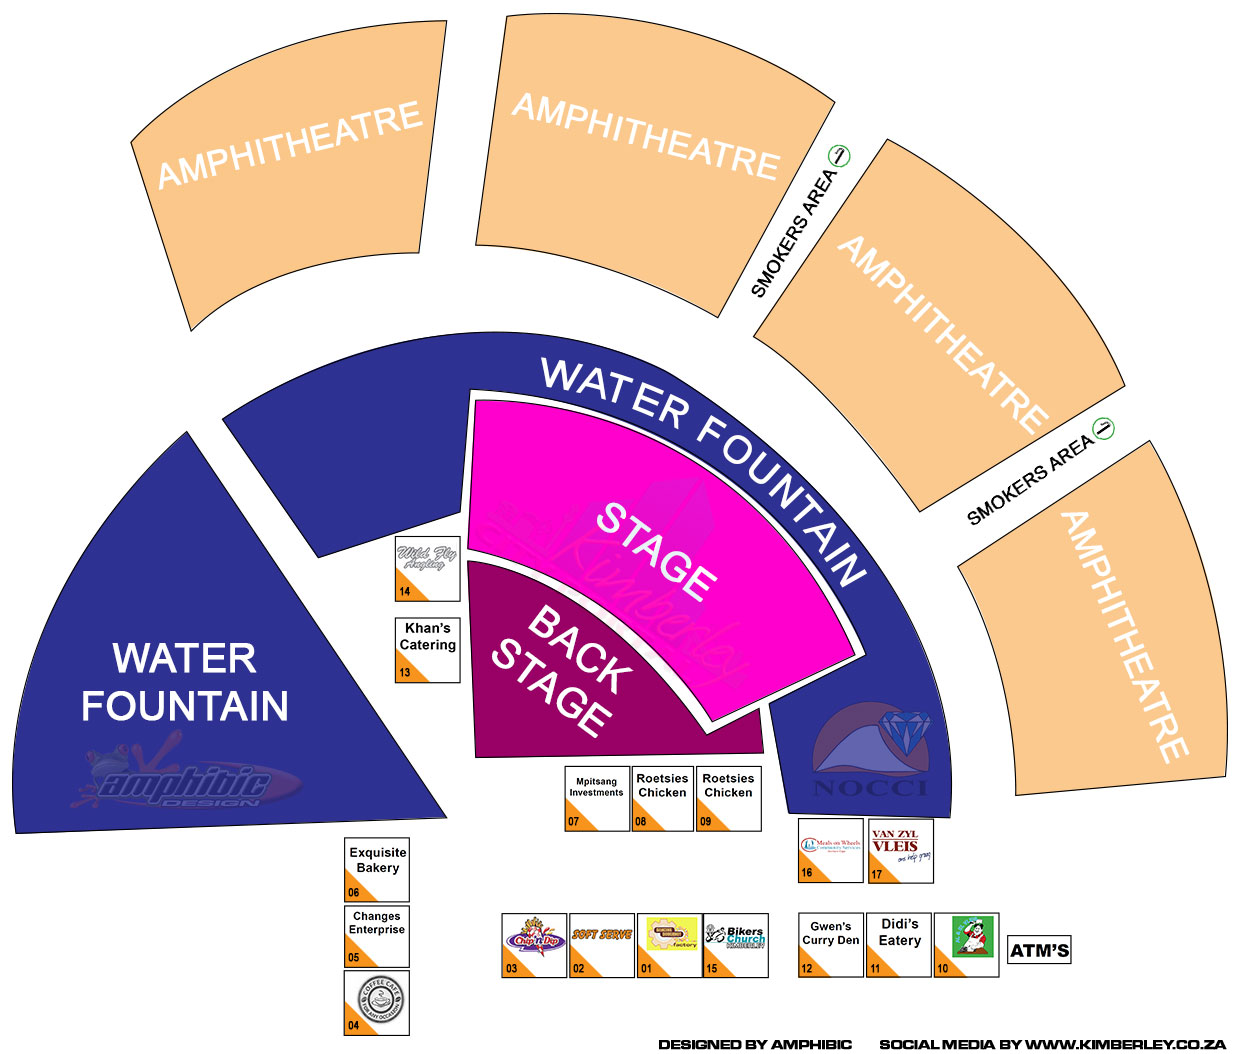 FOOD COURT AND STGE INTERACTIVE FLOOR PLAN - 2018 NOCCI EXPO & TRADE FAIR